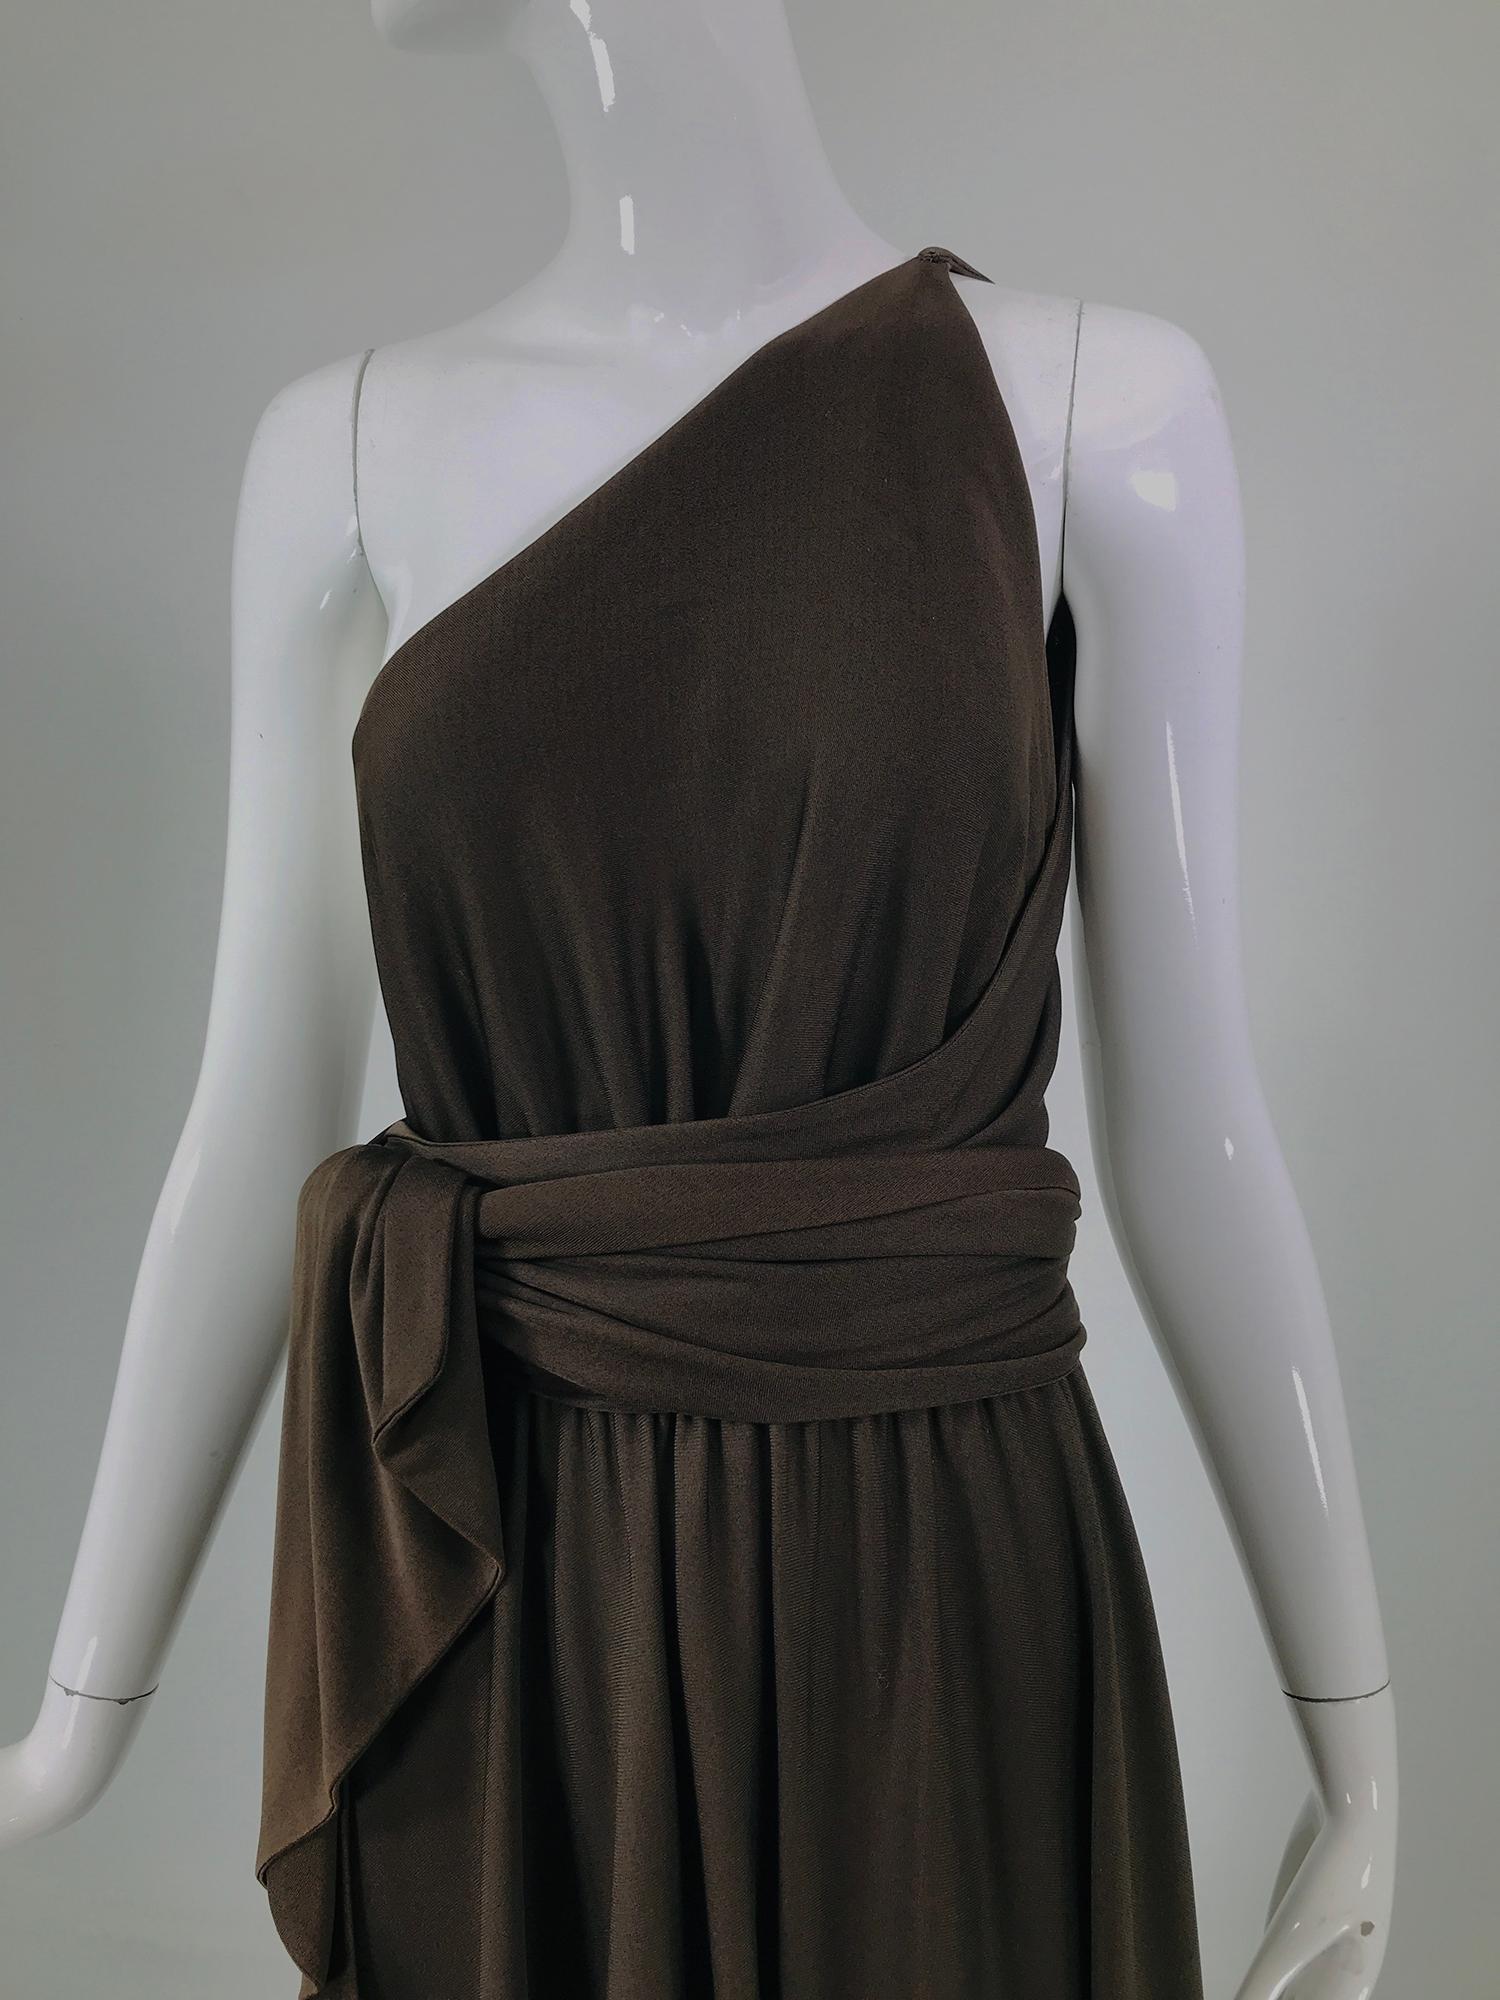 Halston chocolate brown silk double knit jersey, bias cut skirt & bodice, one shoulder wrap & tie top from the 1970s. Simple design, the dress has a cased elastic waist, with attached bias front & back panels that are joined at the left shoulder